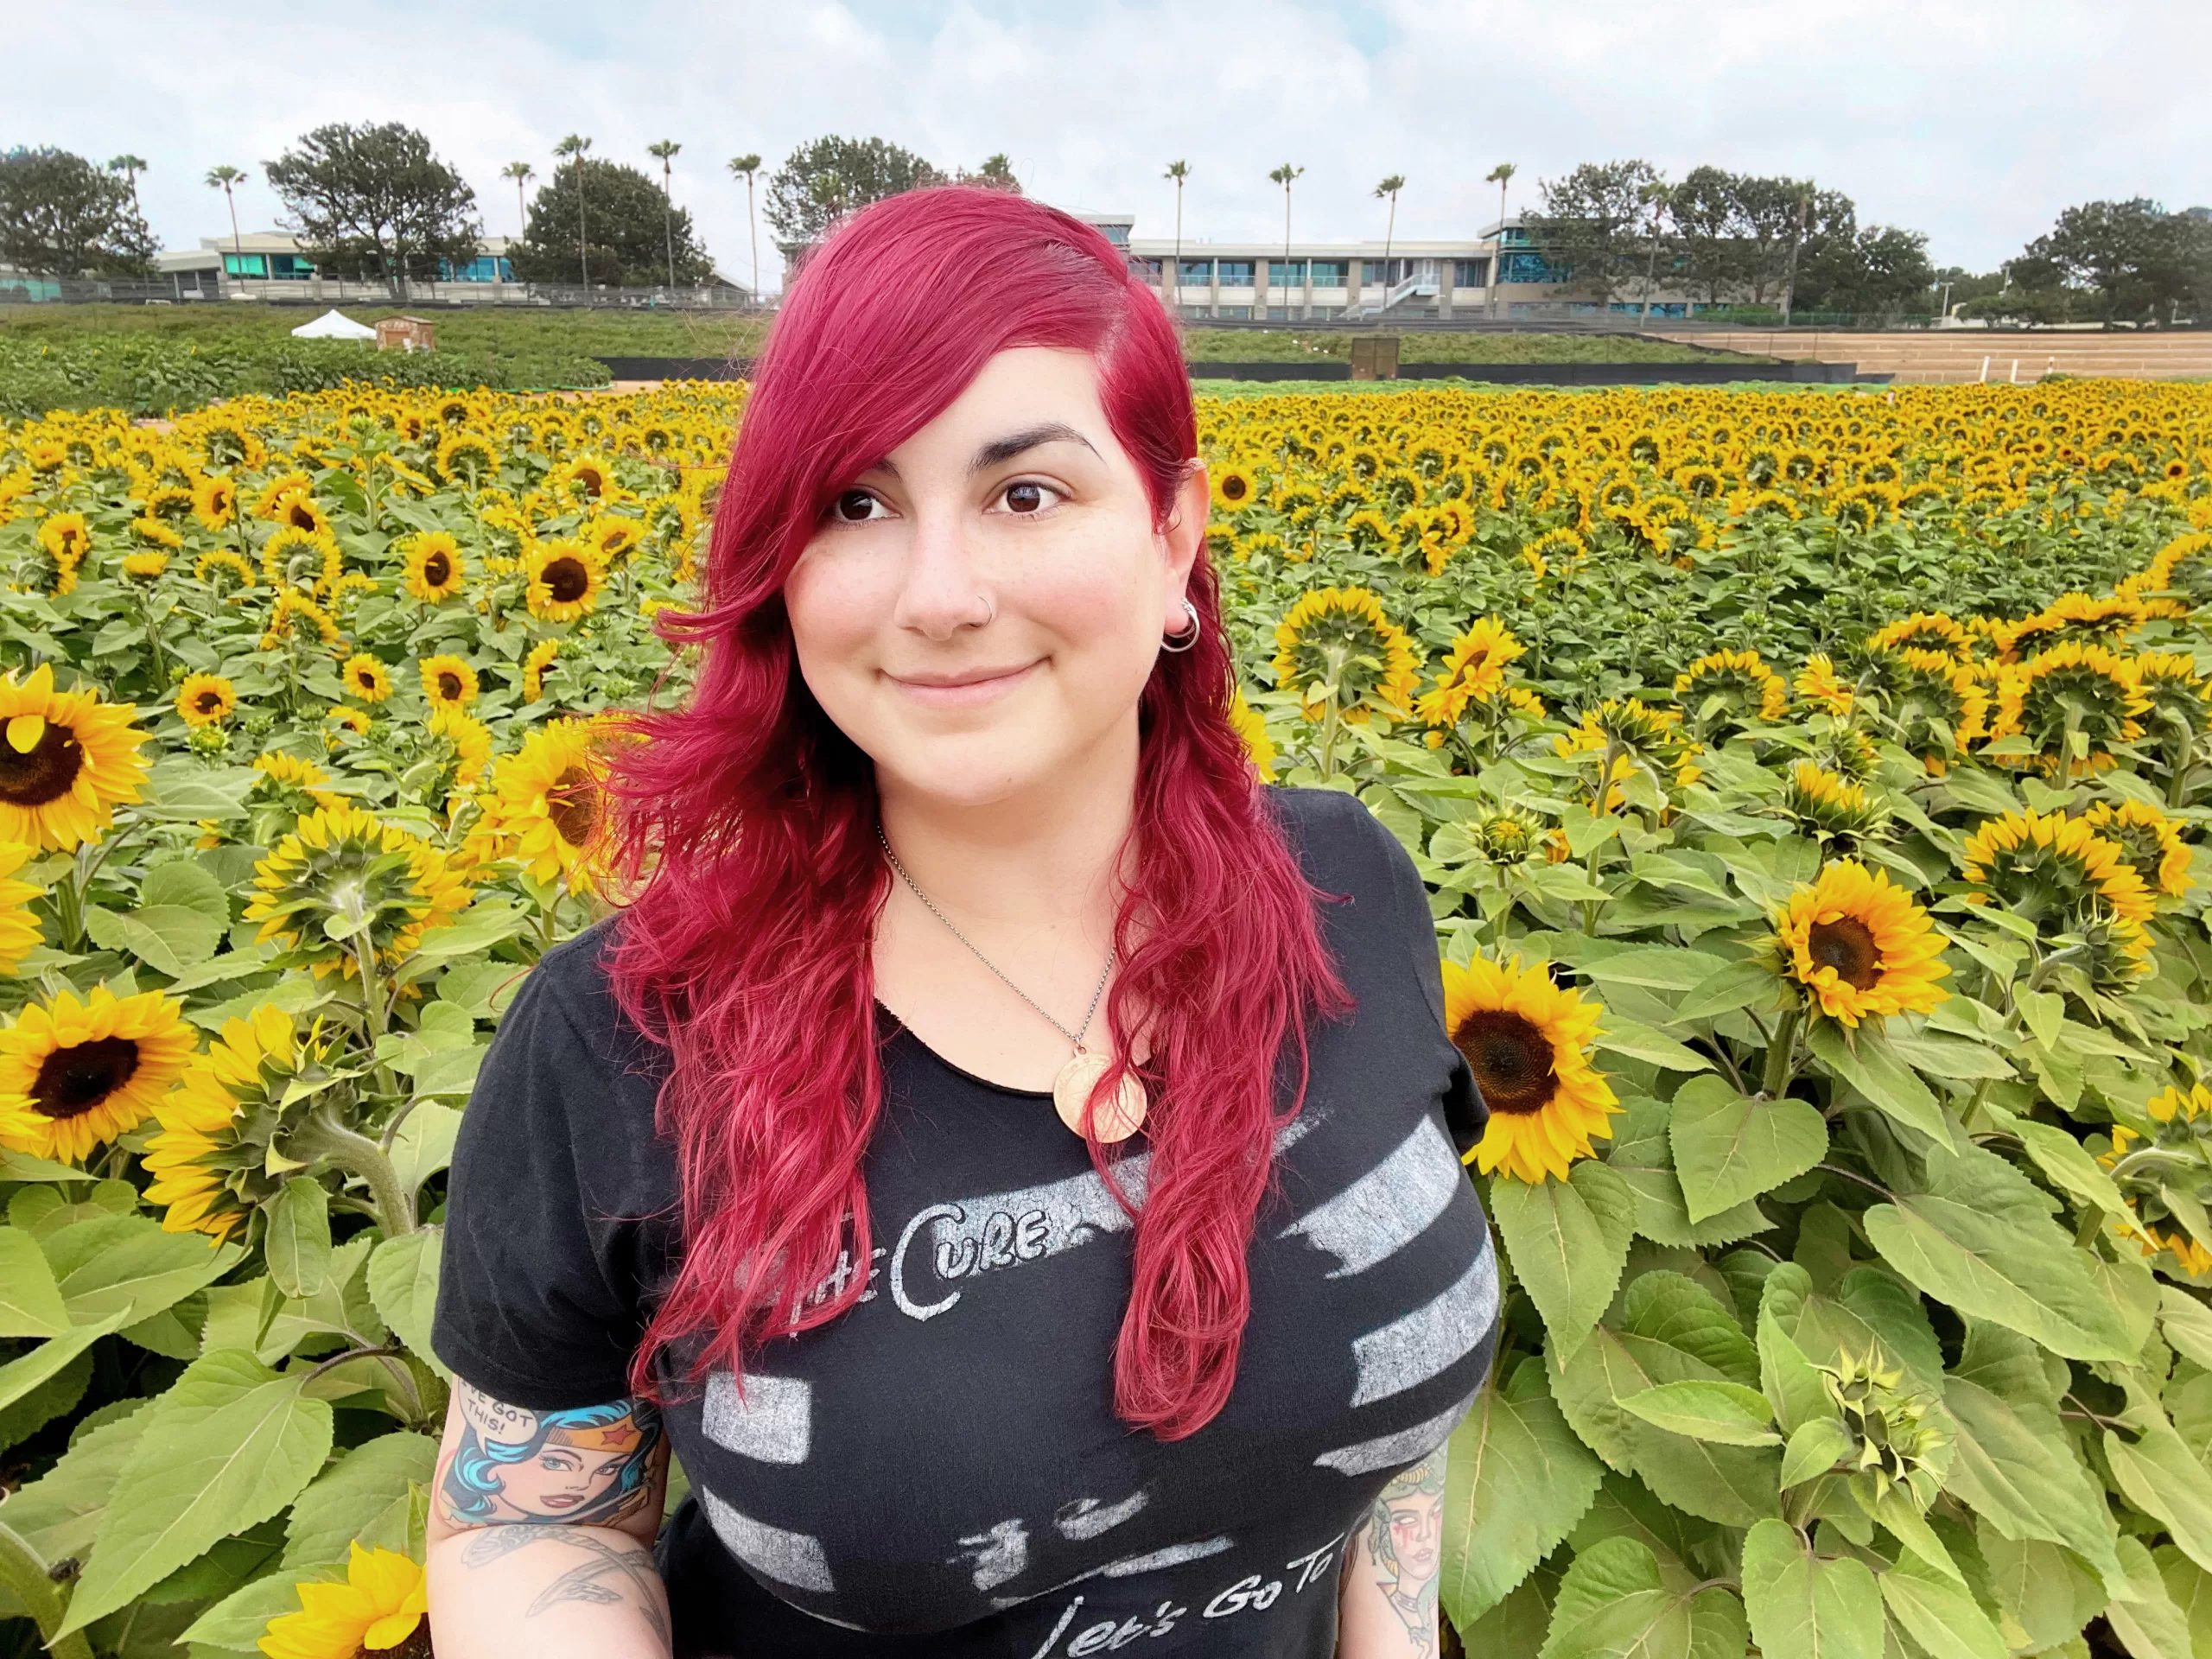 A photo of Kitty in a field of sunflowers. She is wearing a black t-shirt with an image of the band, The Cure. 